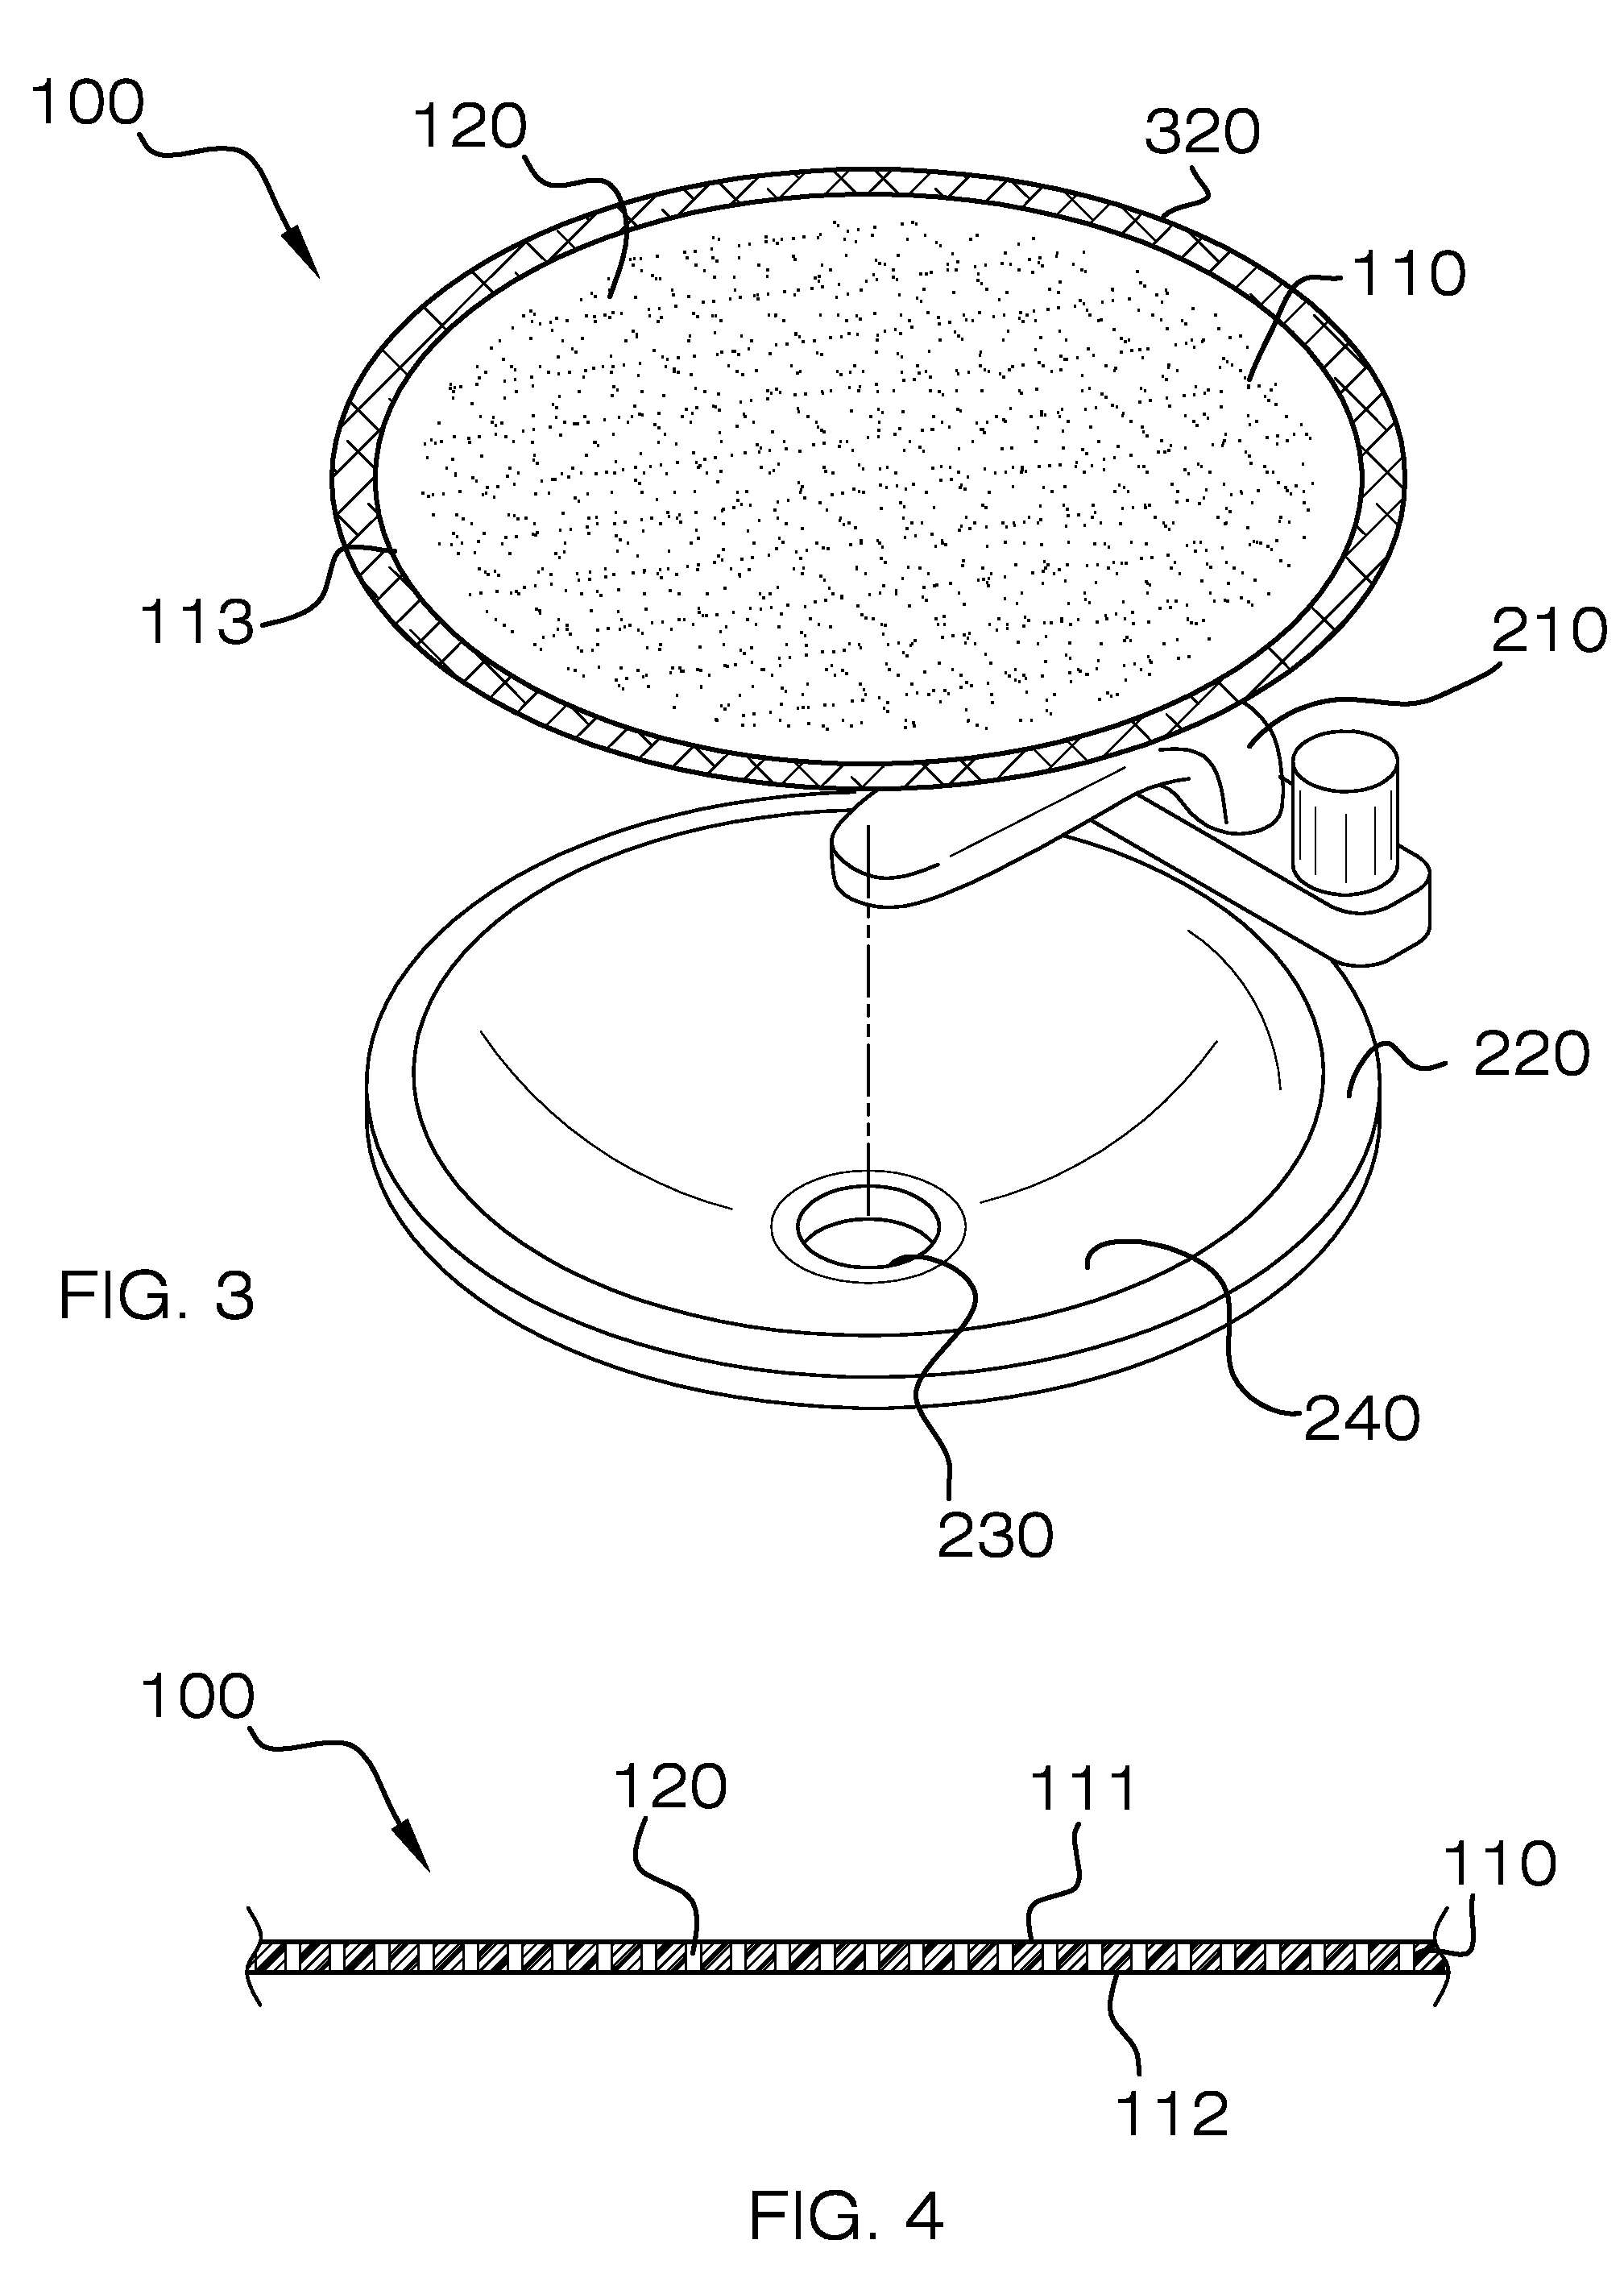 Sink filter device